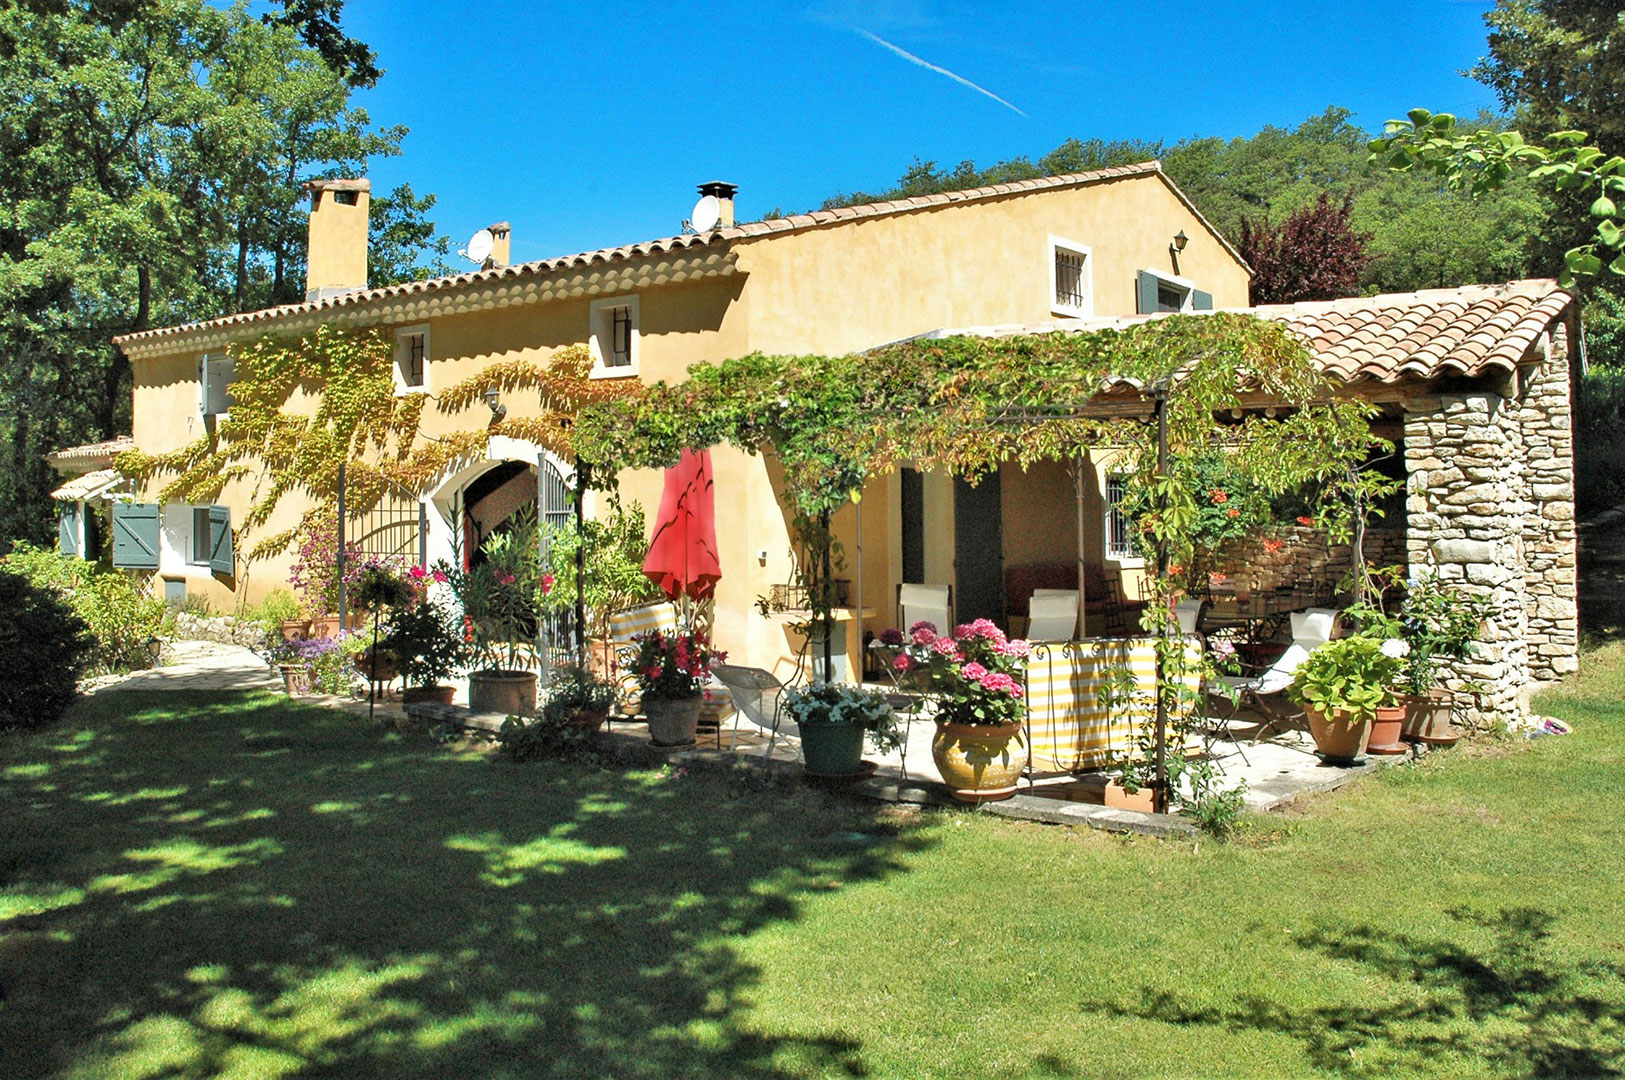 Apt,holiday rental in the countryside, stunning views over the Luberon